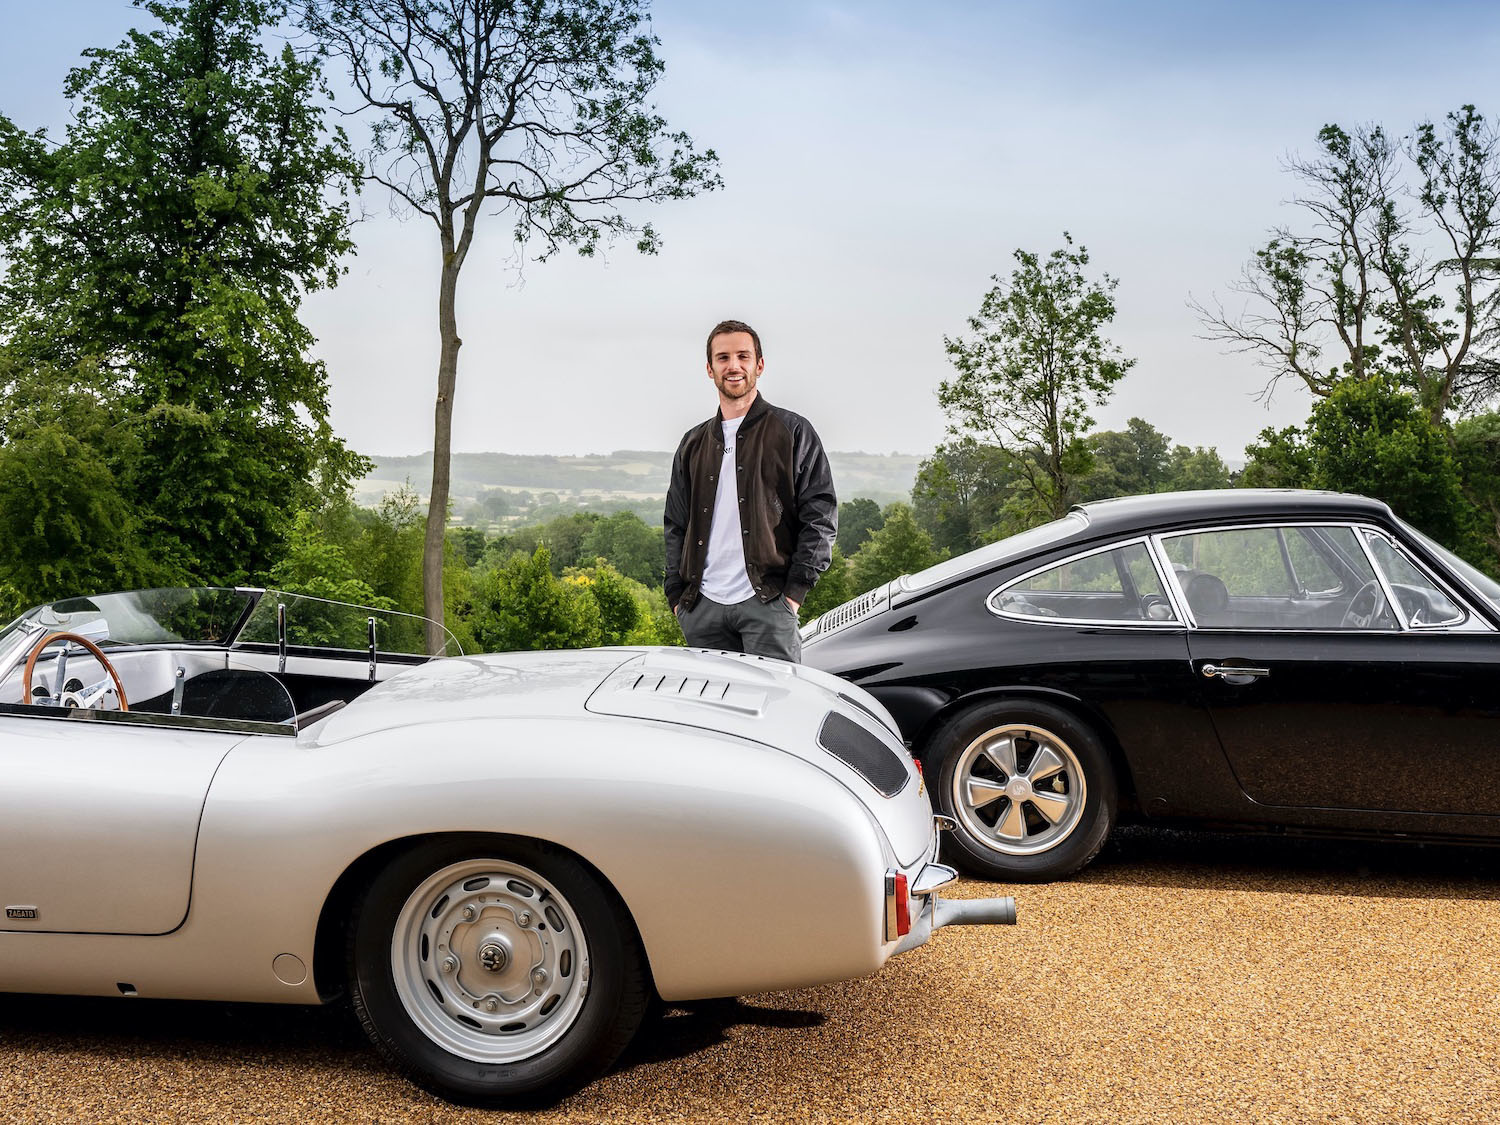 Coldplay bassist Guy Berryman has a passion for collecting and restoring classic cars.